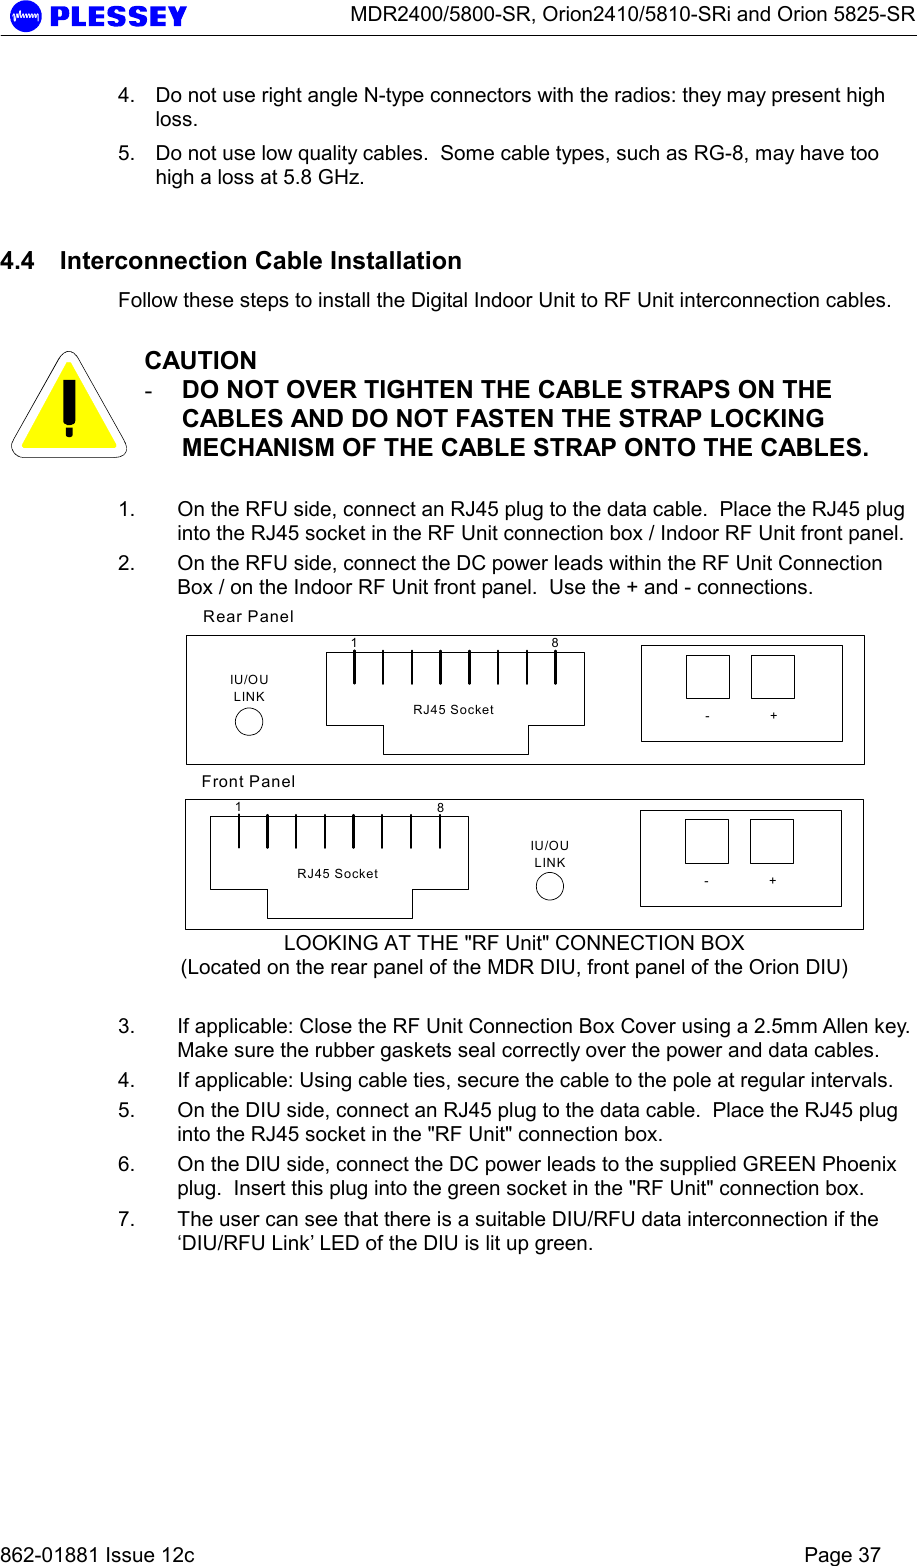      MDR2400/5800-SR, Orion2410/5810-SRi and Orion 5825-SR   862-01881 Issue 12c    Page 37 4.  Do not use right angle N-type connectors with the radios: they may present high loss.  5.  Do not use low quality cables.  Some cable types, such as RG-8, may have too high a loss at 5.8 GHz.   4.4  Interconnection Cable Installation Follow these steps to install the Digital Indoor Unit to RF Unit interconnection cables.   CAUTION -  DO NOT OVER TIGHTEN THE CABLE STRAPS ON THE CABLES AND DO NOT FASTEN THE STRAP LOCKING MECHANISM OF THE CABLE STRAP ONTO THE CABLES.  1.  On the RFU side, connect an RJ45 plug to the data cable.  Place the RJ45 plug into the RJ45 socket in the RF Unit connection box / Indoor RF Unit front panel. 2.  On the RFU side, connect the DC power leads within the RF Unit Connection Box / on the Indoor RF Unit front panel.  Use the + and - connections. 18-+RJ45 SocketIU/OULINK18-+RJ45 SocketIU/OULINKRear PanelFront Panel LOOKING AT THE &quot;RF Unit&quot; CONNECTION BOX (Located on the rear panel of the MDR DIU, front panel of the Orion DIU)  3.  If applicable: Close the RF Unit Connection Box Cover using a 2.5mm Allen key.  Make sure the rubber gaskets seal correctly over the power and data cables. 4.  If applicable: Using cable ties, secure the cable to the pole at regular intervals.  5.  On the DIU side, connect an RJ45 plug to the data cable.  Place the RJ45 plug into the RJ45 socket in the &quot;RF Unit&quot; connection box.   6.  On the DIU side, connect the DC power leads to the supplied GREEN Phoenix plug.  Insert this plug into the green socket in the &quot;RF Unit&quot; connection box. 7.  The user can see that there is a suitable DIU/RFU data interconnection if the ‘DIU/RFU Link’ LED of the DIU is lit up green.   